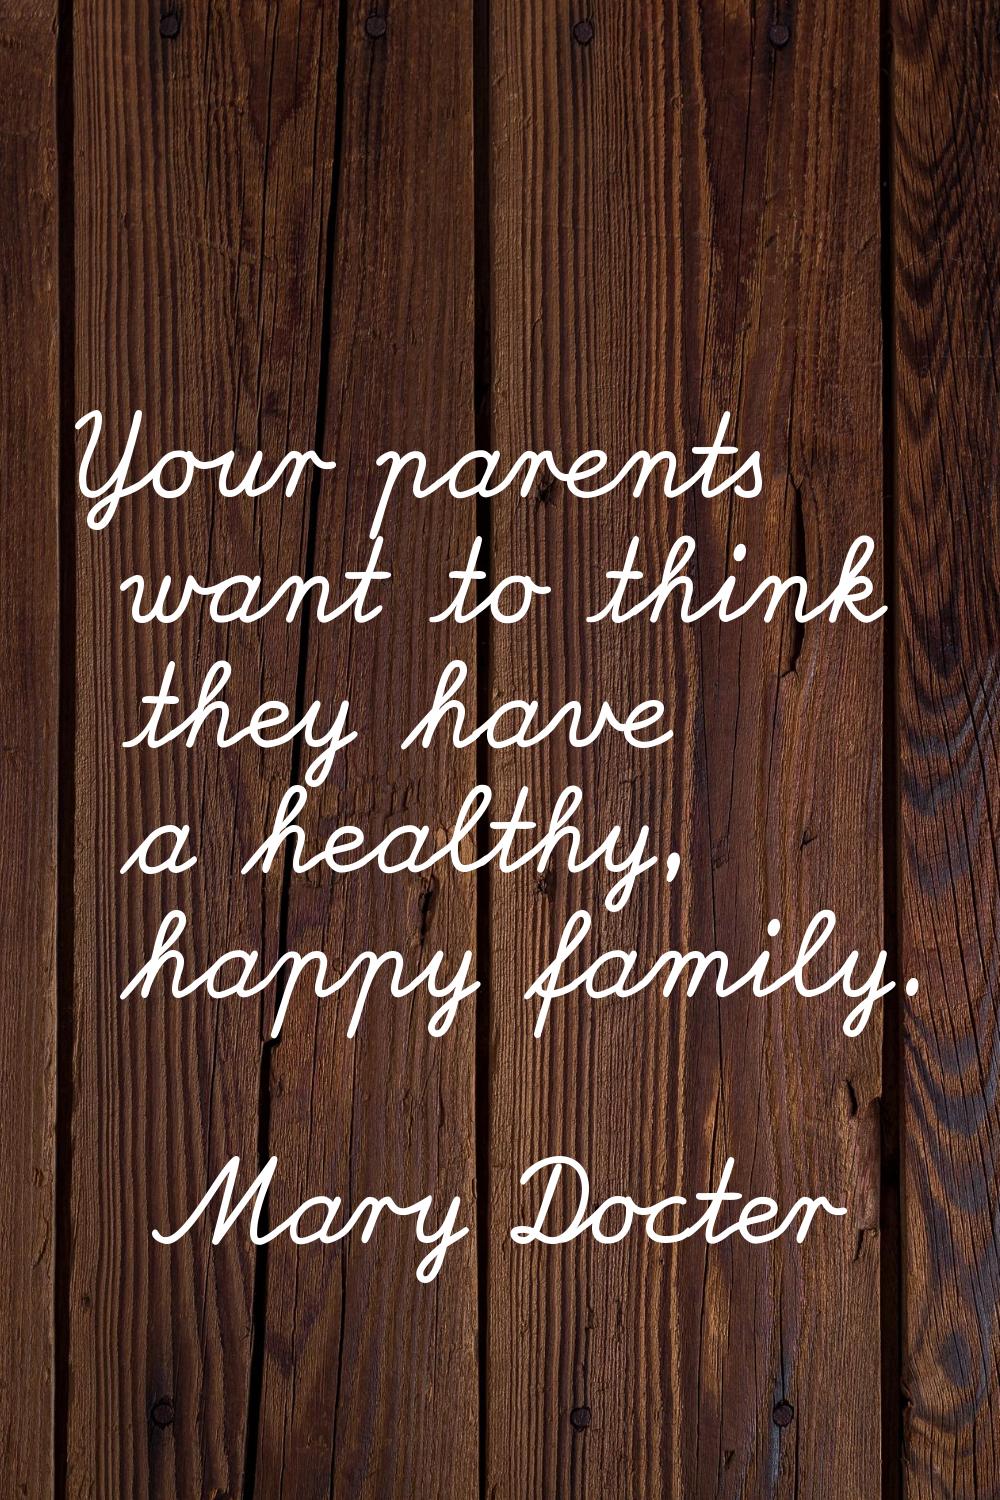 Your parents want to think they have a healthy, happy family.